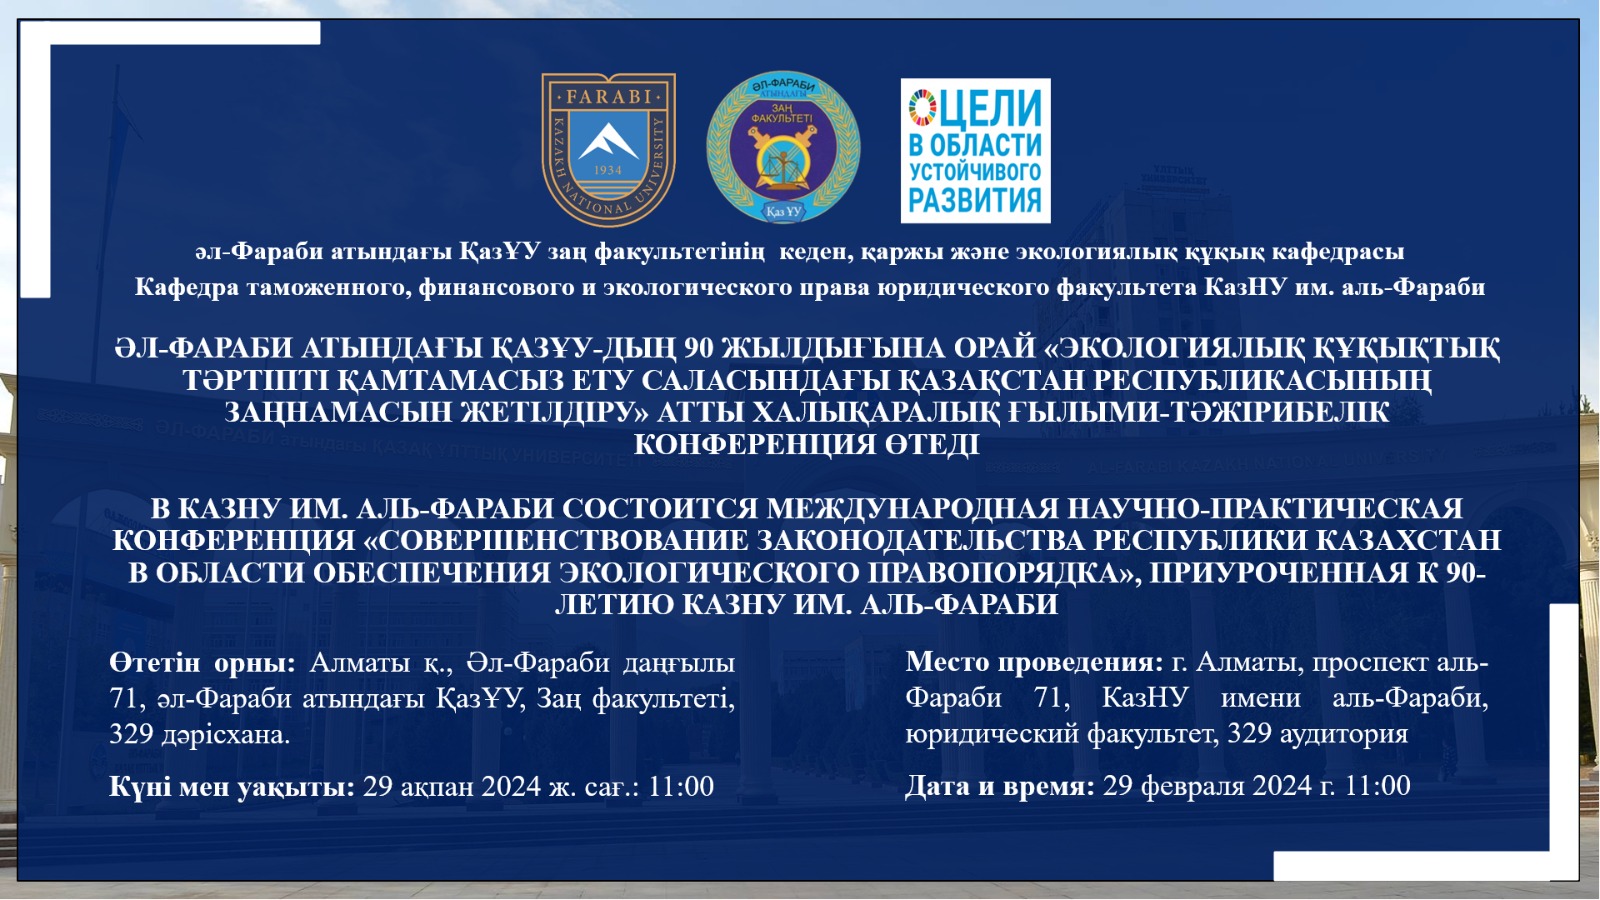 The Al-Farabi Kazakh National University will host an international scientific and practical conference "Improving the legislation of the Republic of Kazakhstan in the field of environmental law enforcement", dedicated to the 90th anniversary of the al-Farabi Kazakh National University